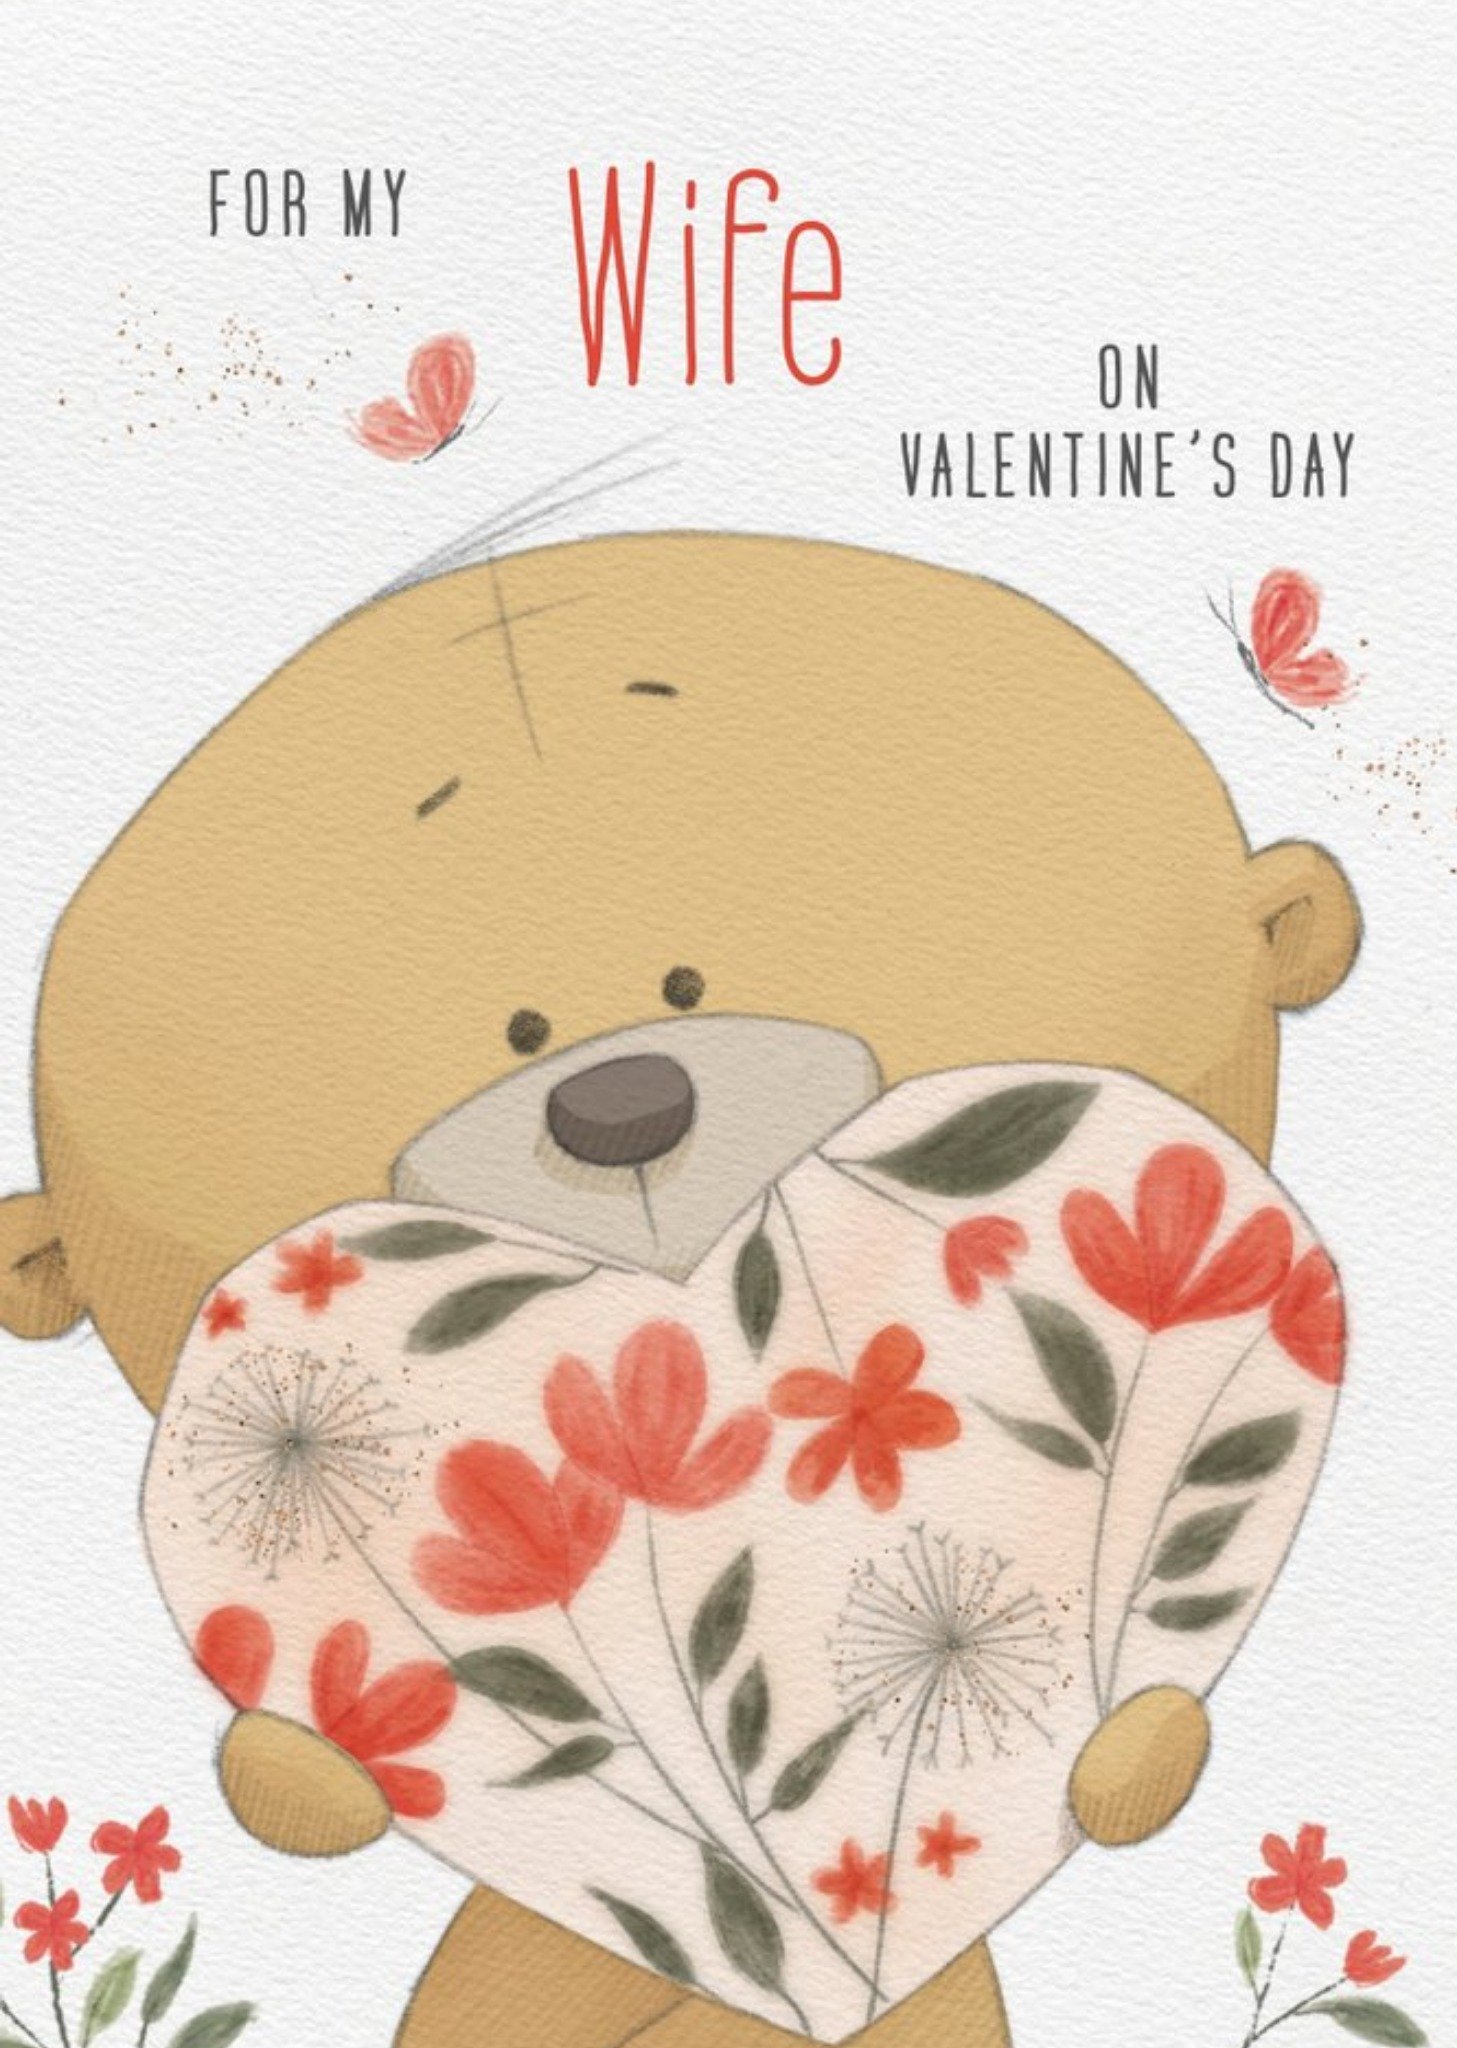 Moonpig Cute Uddle For My Wife Valentine's Day Card, Large